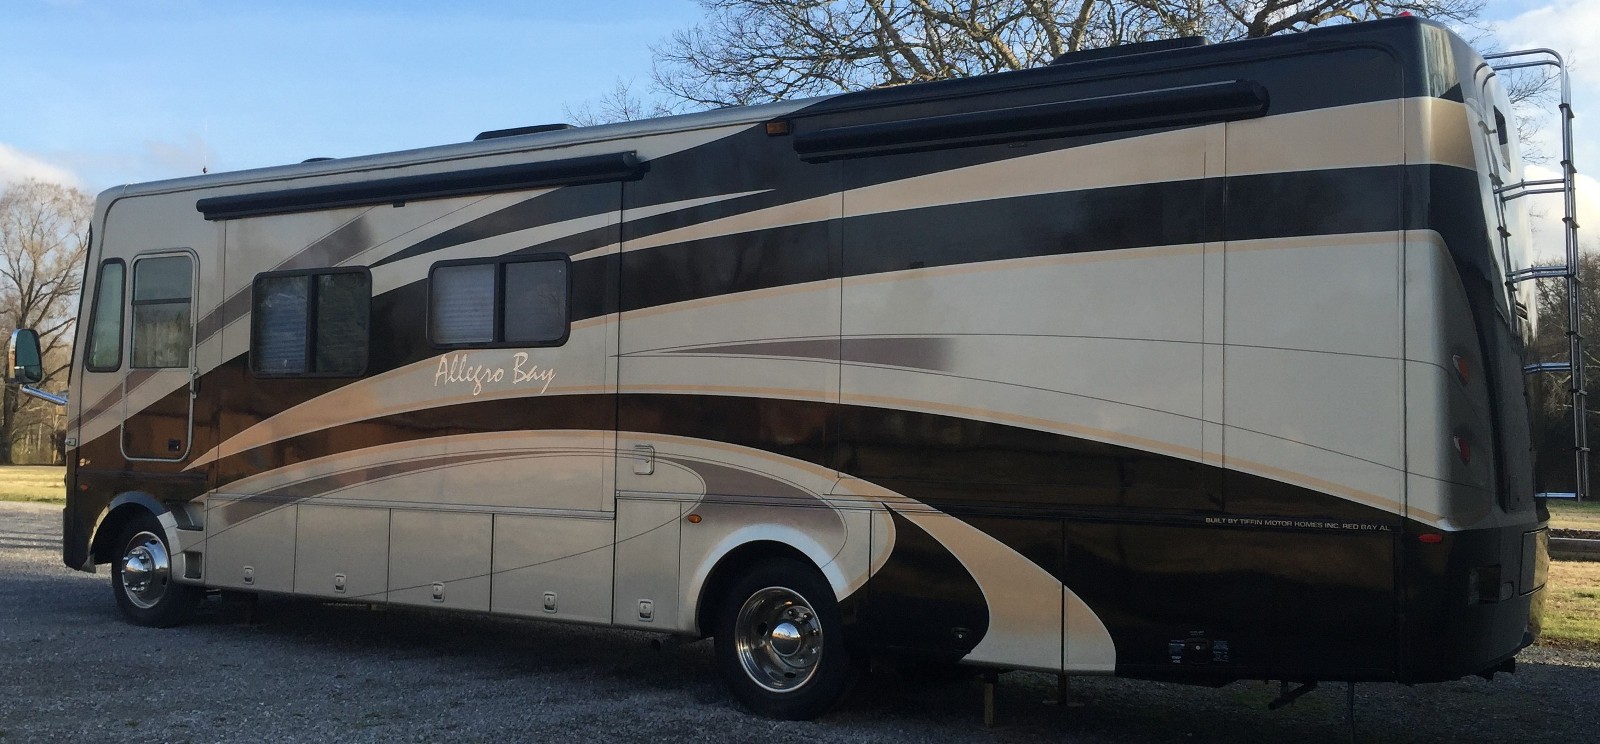 2007 Allegro Bay 34XB | Tiffin Motorhomes For Sale By Owner 2007 Tiffin Allegro Bay 34xb Specs